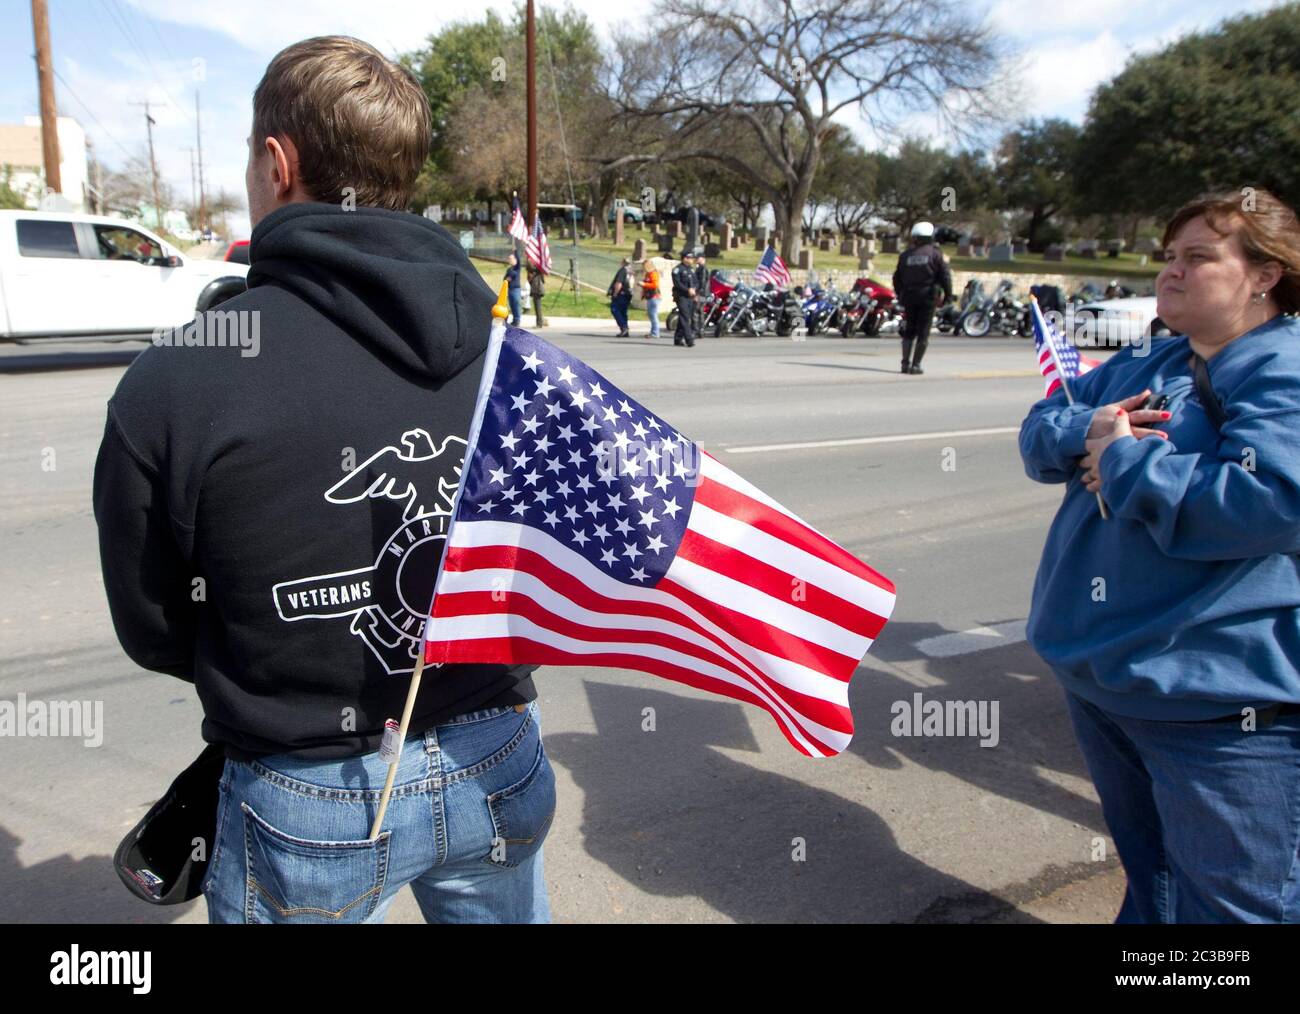 Austin Texas USA, February 12, 2013: Mourners line the street to pay respects to former Navy SEAL Chris Kyle as his funeral cortege passes on its way to his burial at the Texas State Cemetery. Kyle served four tours of duty as a sniper during the Iraq war, and wrote a book about his experiences there. He was fatally shot by a fellow Iraq war veteran at a gun range in Glen Rose, Texas on February 2. ©Marjorie Kamys Cotera/Daemmrich Photography Stock Photo